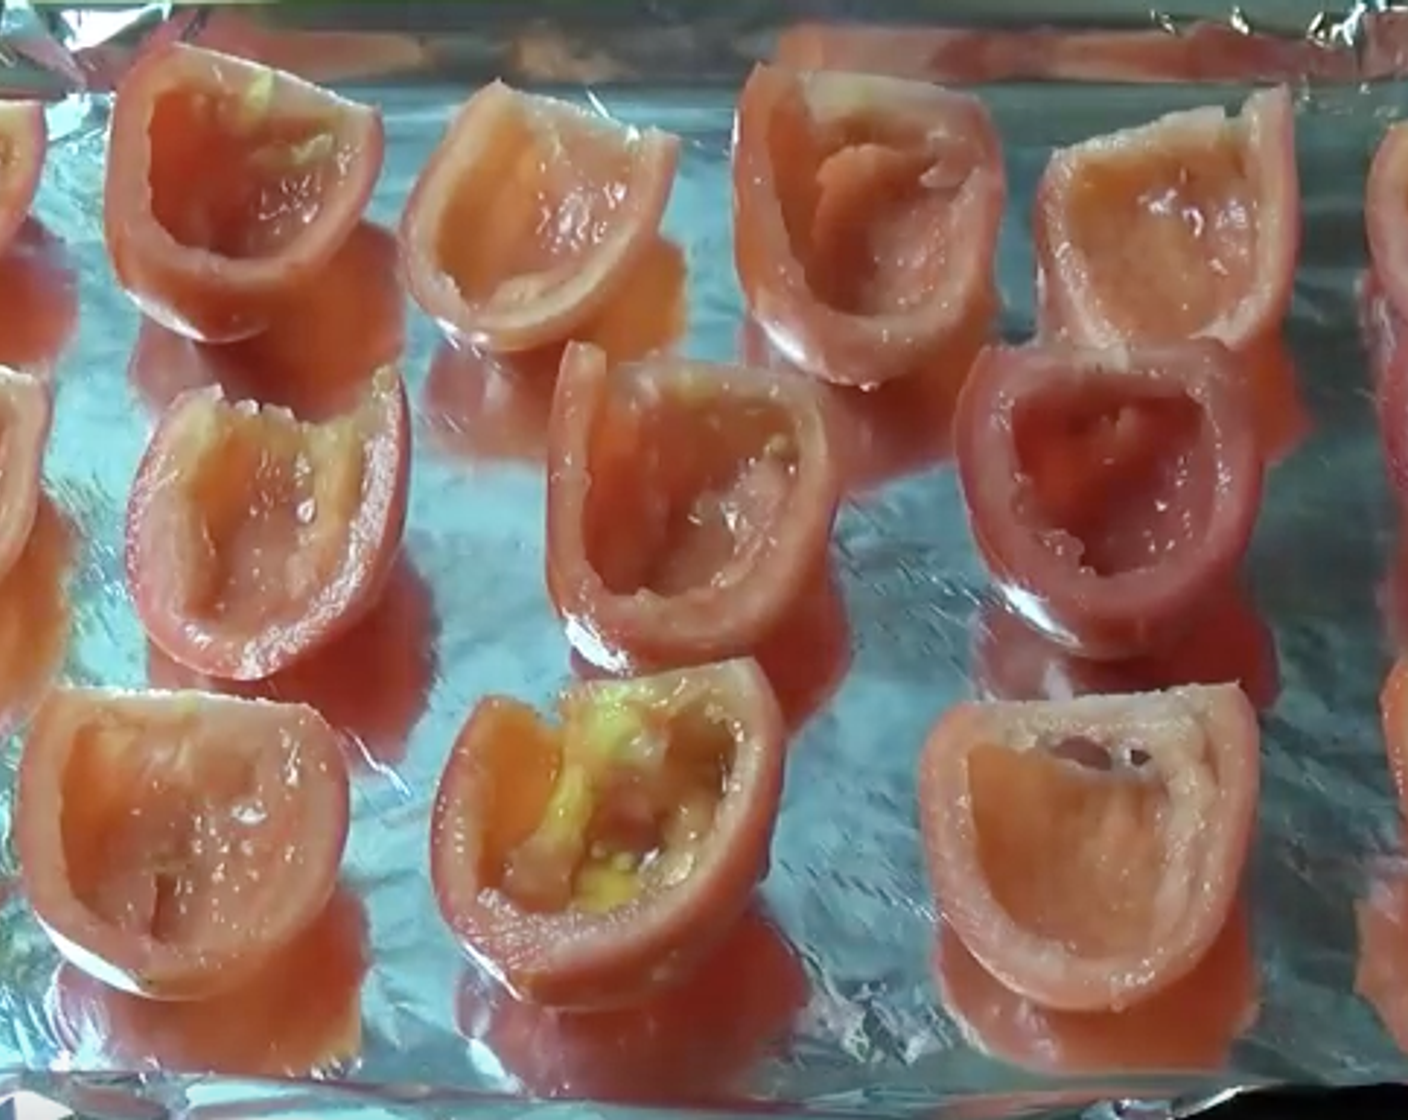 step 3 Slice in half lengthwise then simply use a teaspoon to get rid of the seeds and the watery bit from the center of the tomatoes. Then we can arrange tomatoes onto a baking tray lined with some aluminium foil.